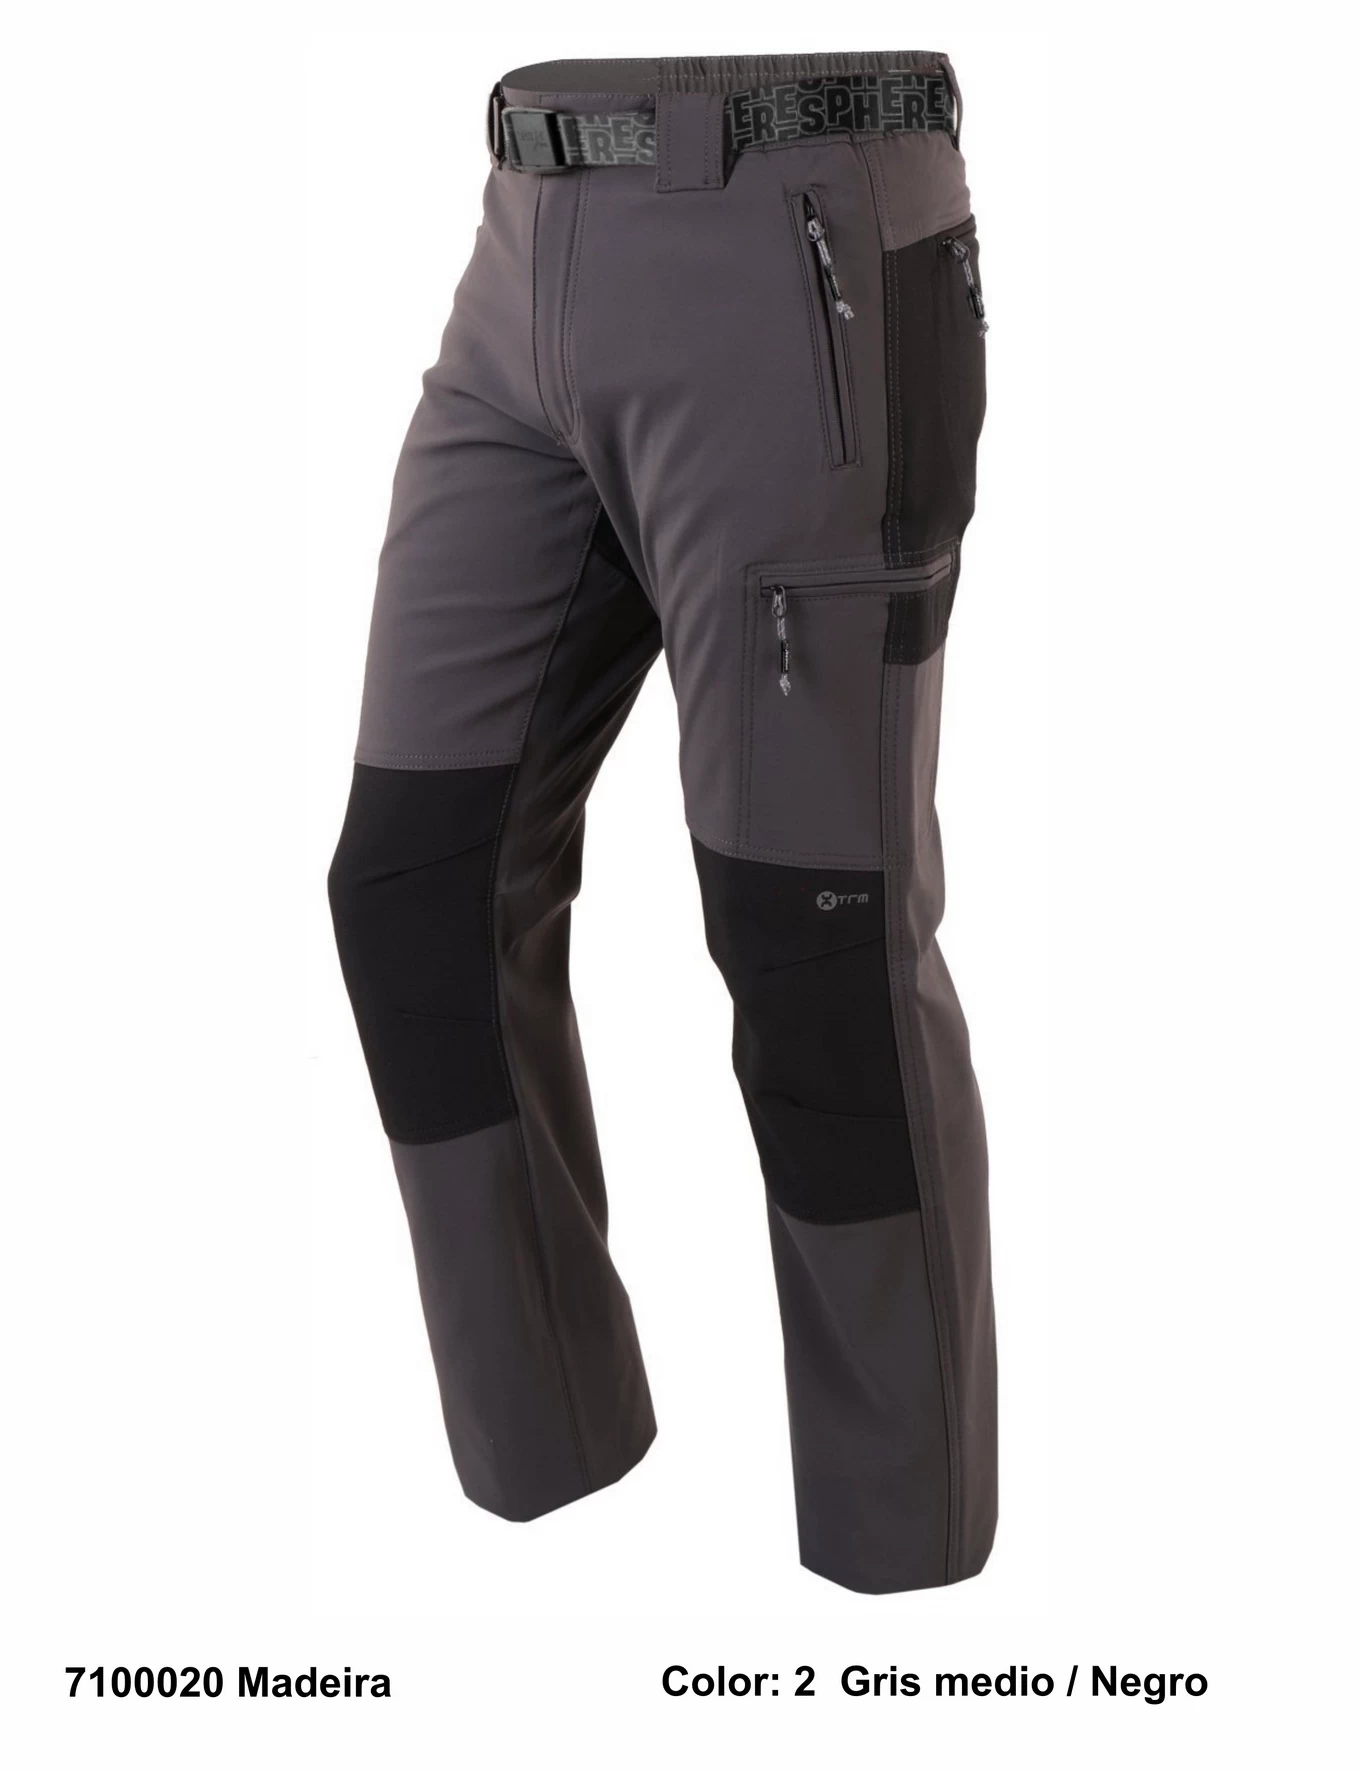 Men's Trekking and Hiking Pants and Trousers – Tripole Gears